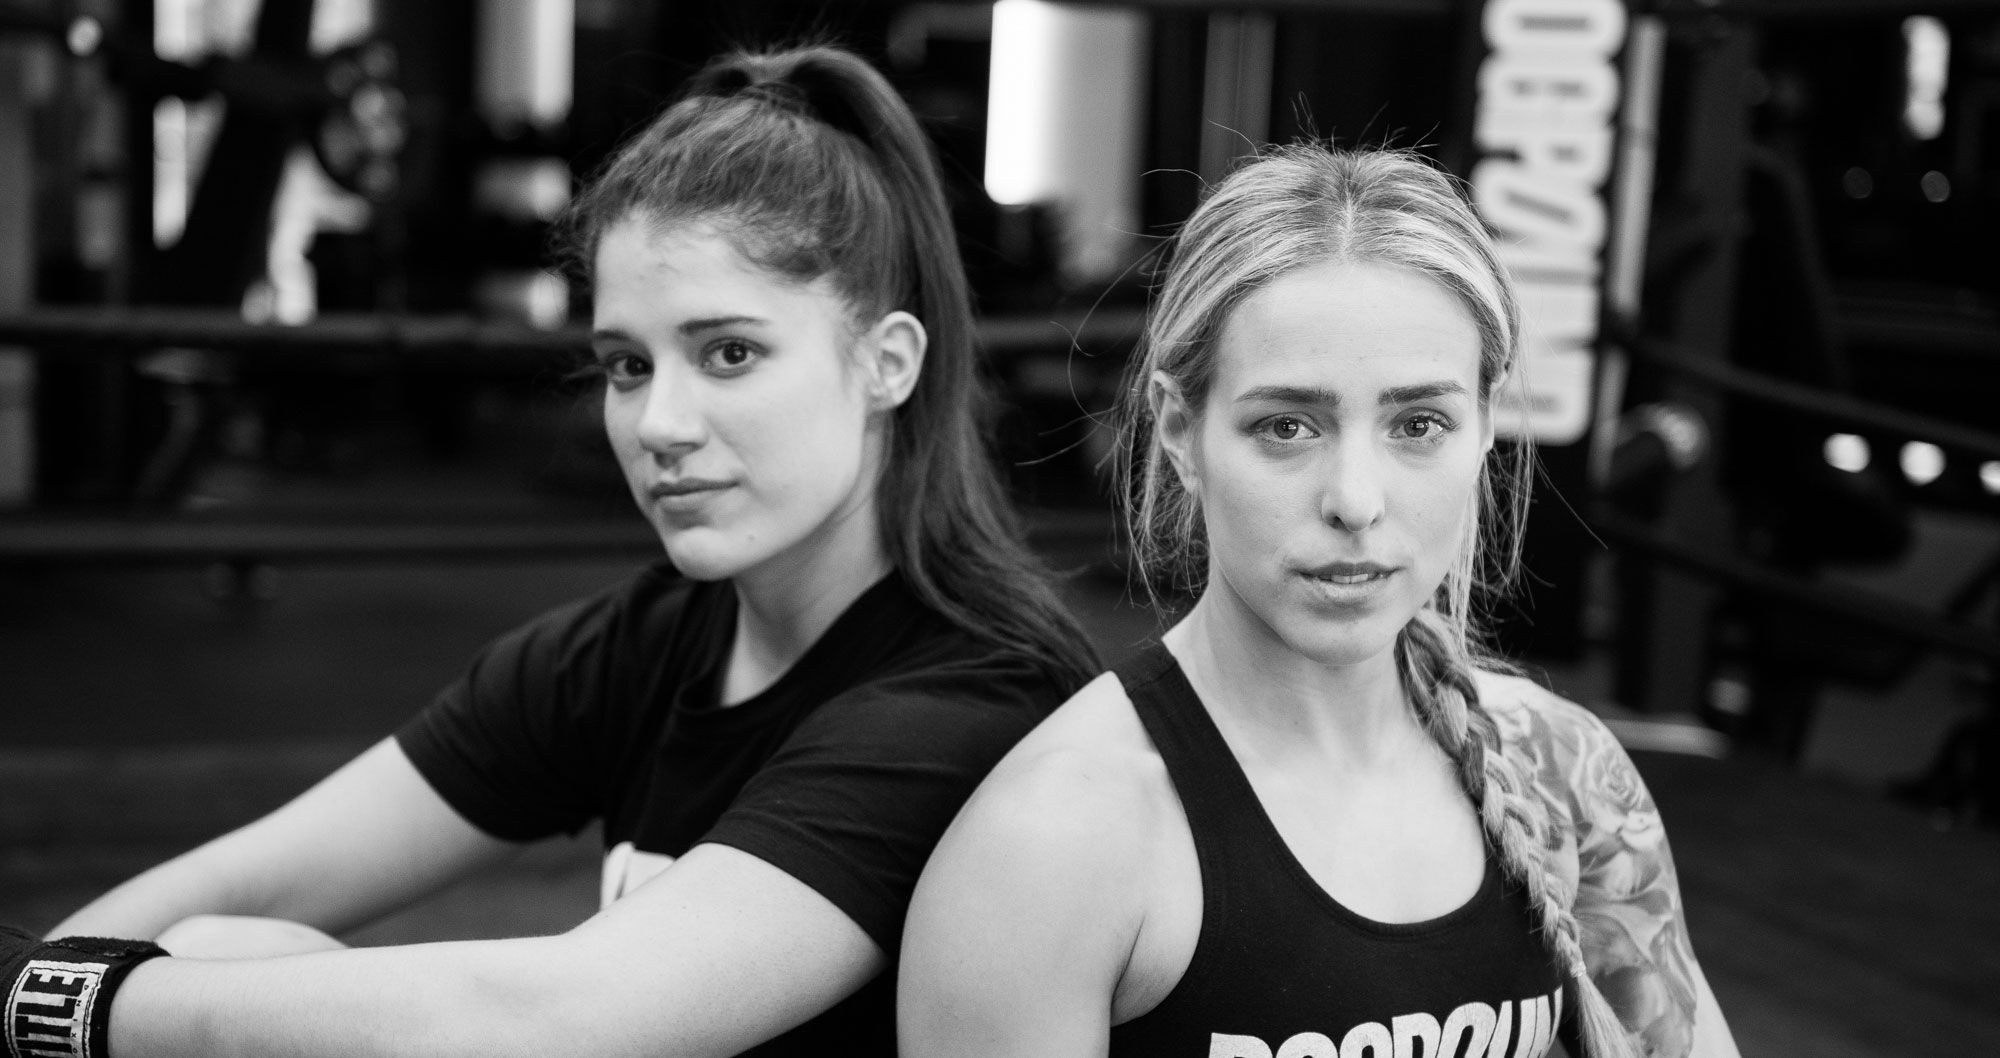 The Most Badass Model Boxing Workout